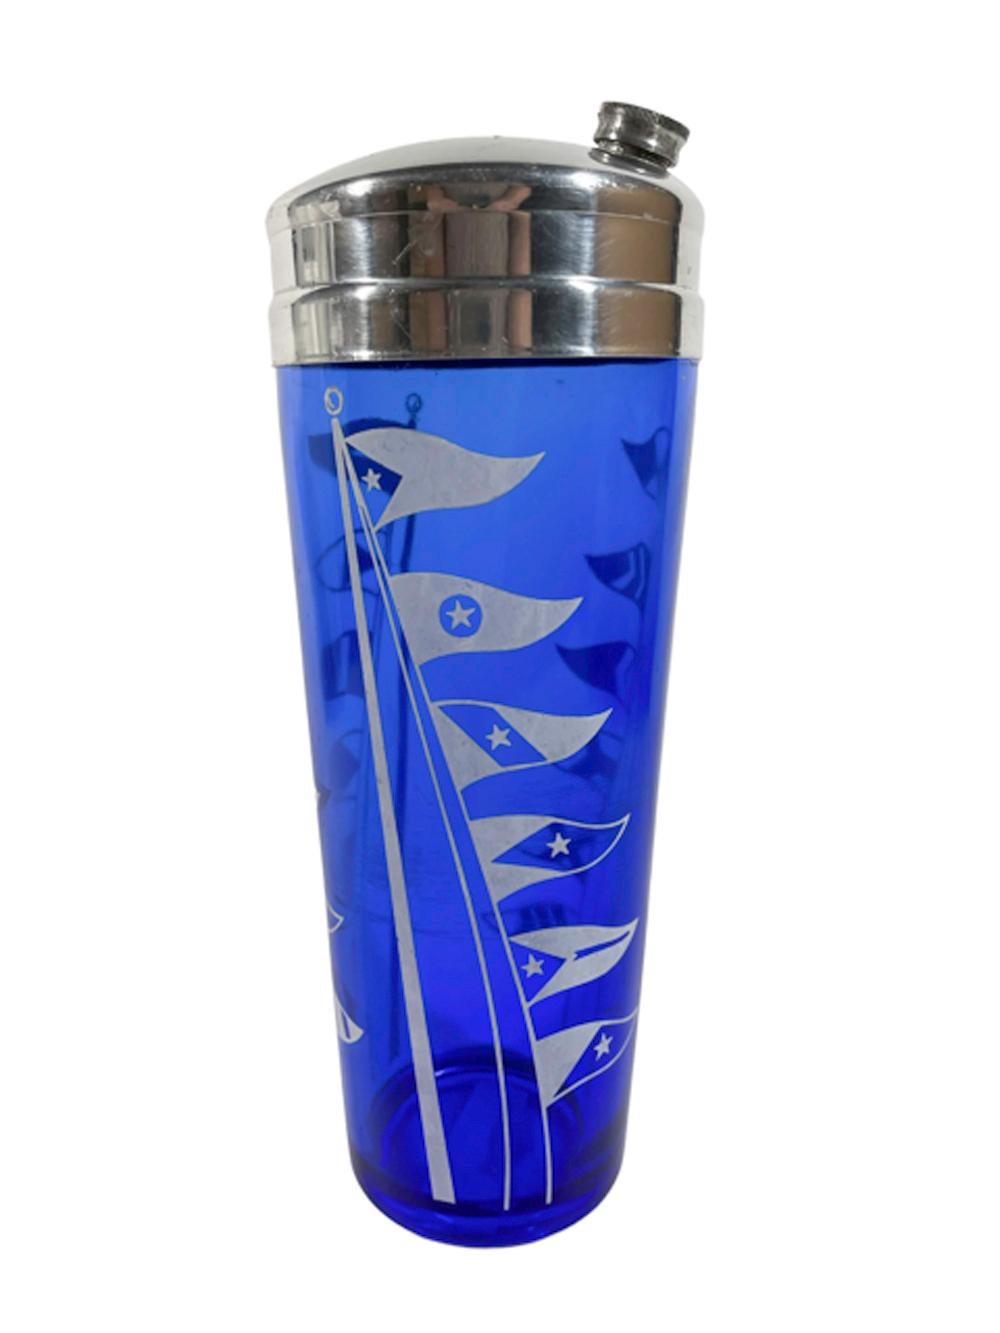 Art Deco cobalt glass cocktail shaker from the Sportsman Series decorated with white nautical signal flags on a pole. The glass shaker is topped with a chrome lid with a threaded cap on the pour spout and integral strainer.